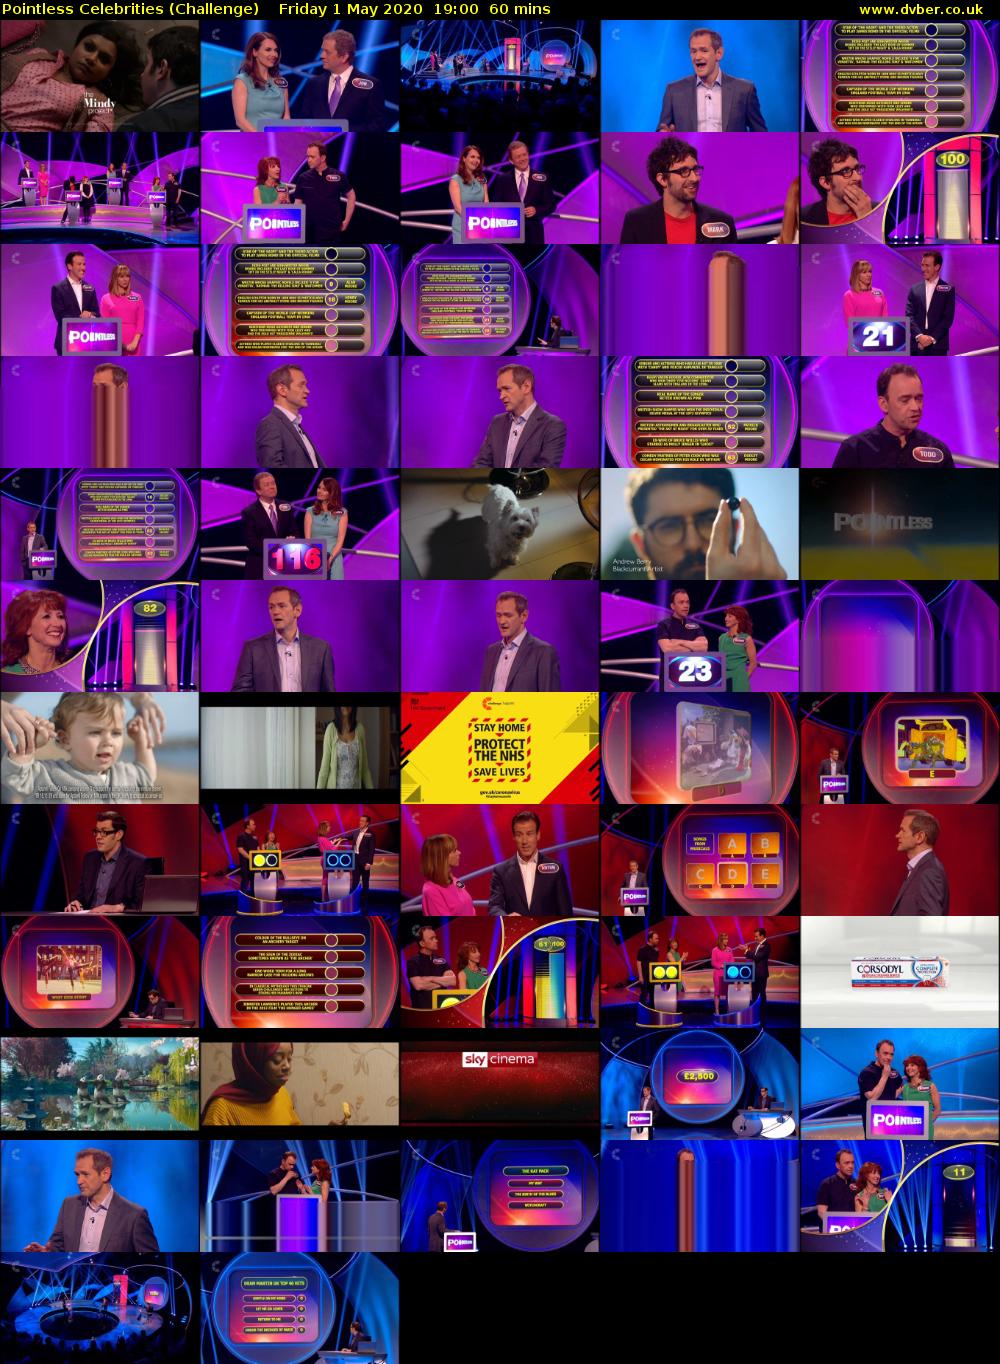 Pointless Celebrities (Challenge) Friday 1 May 2020 19:00 - 20:00